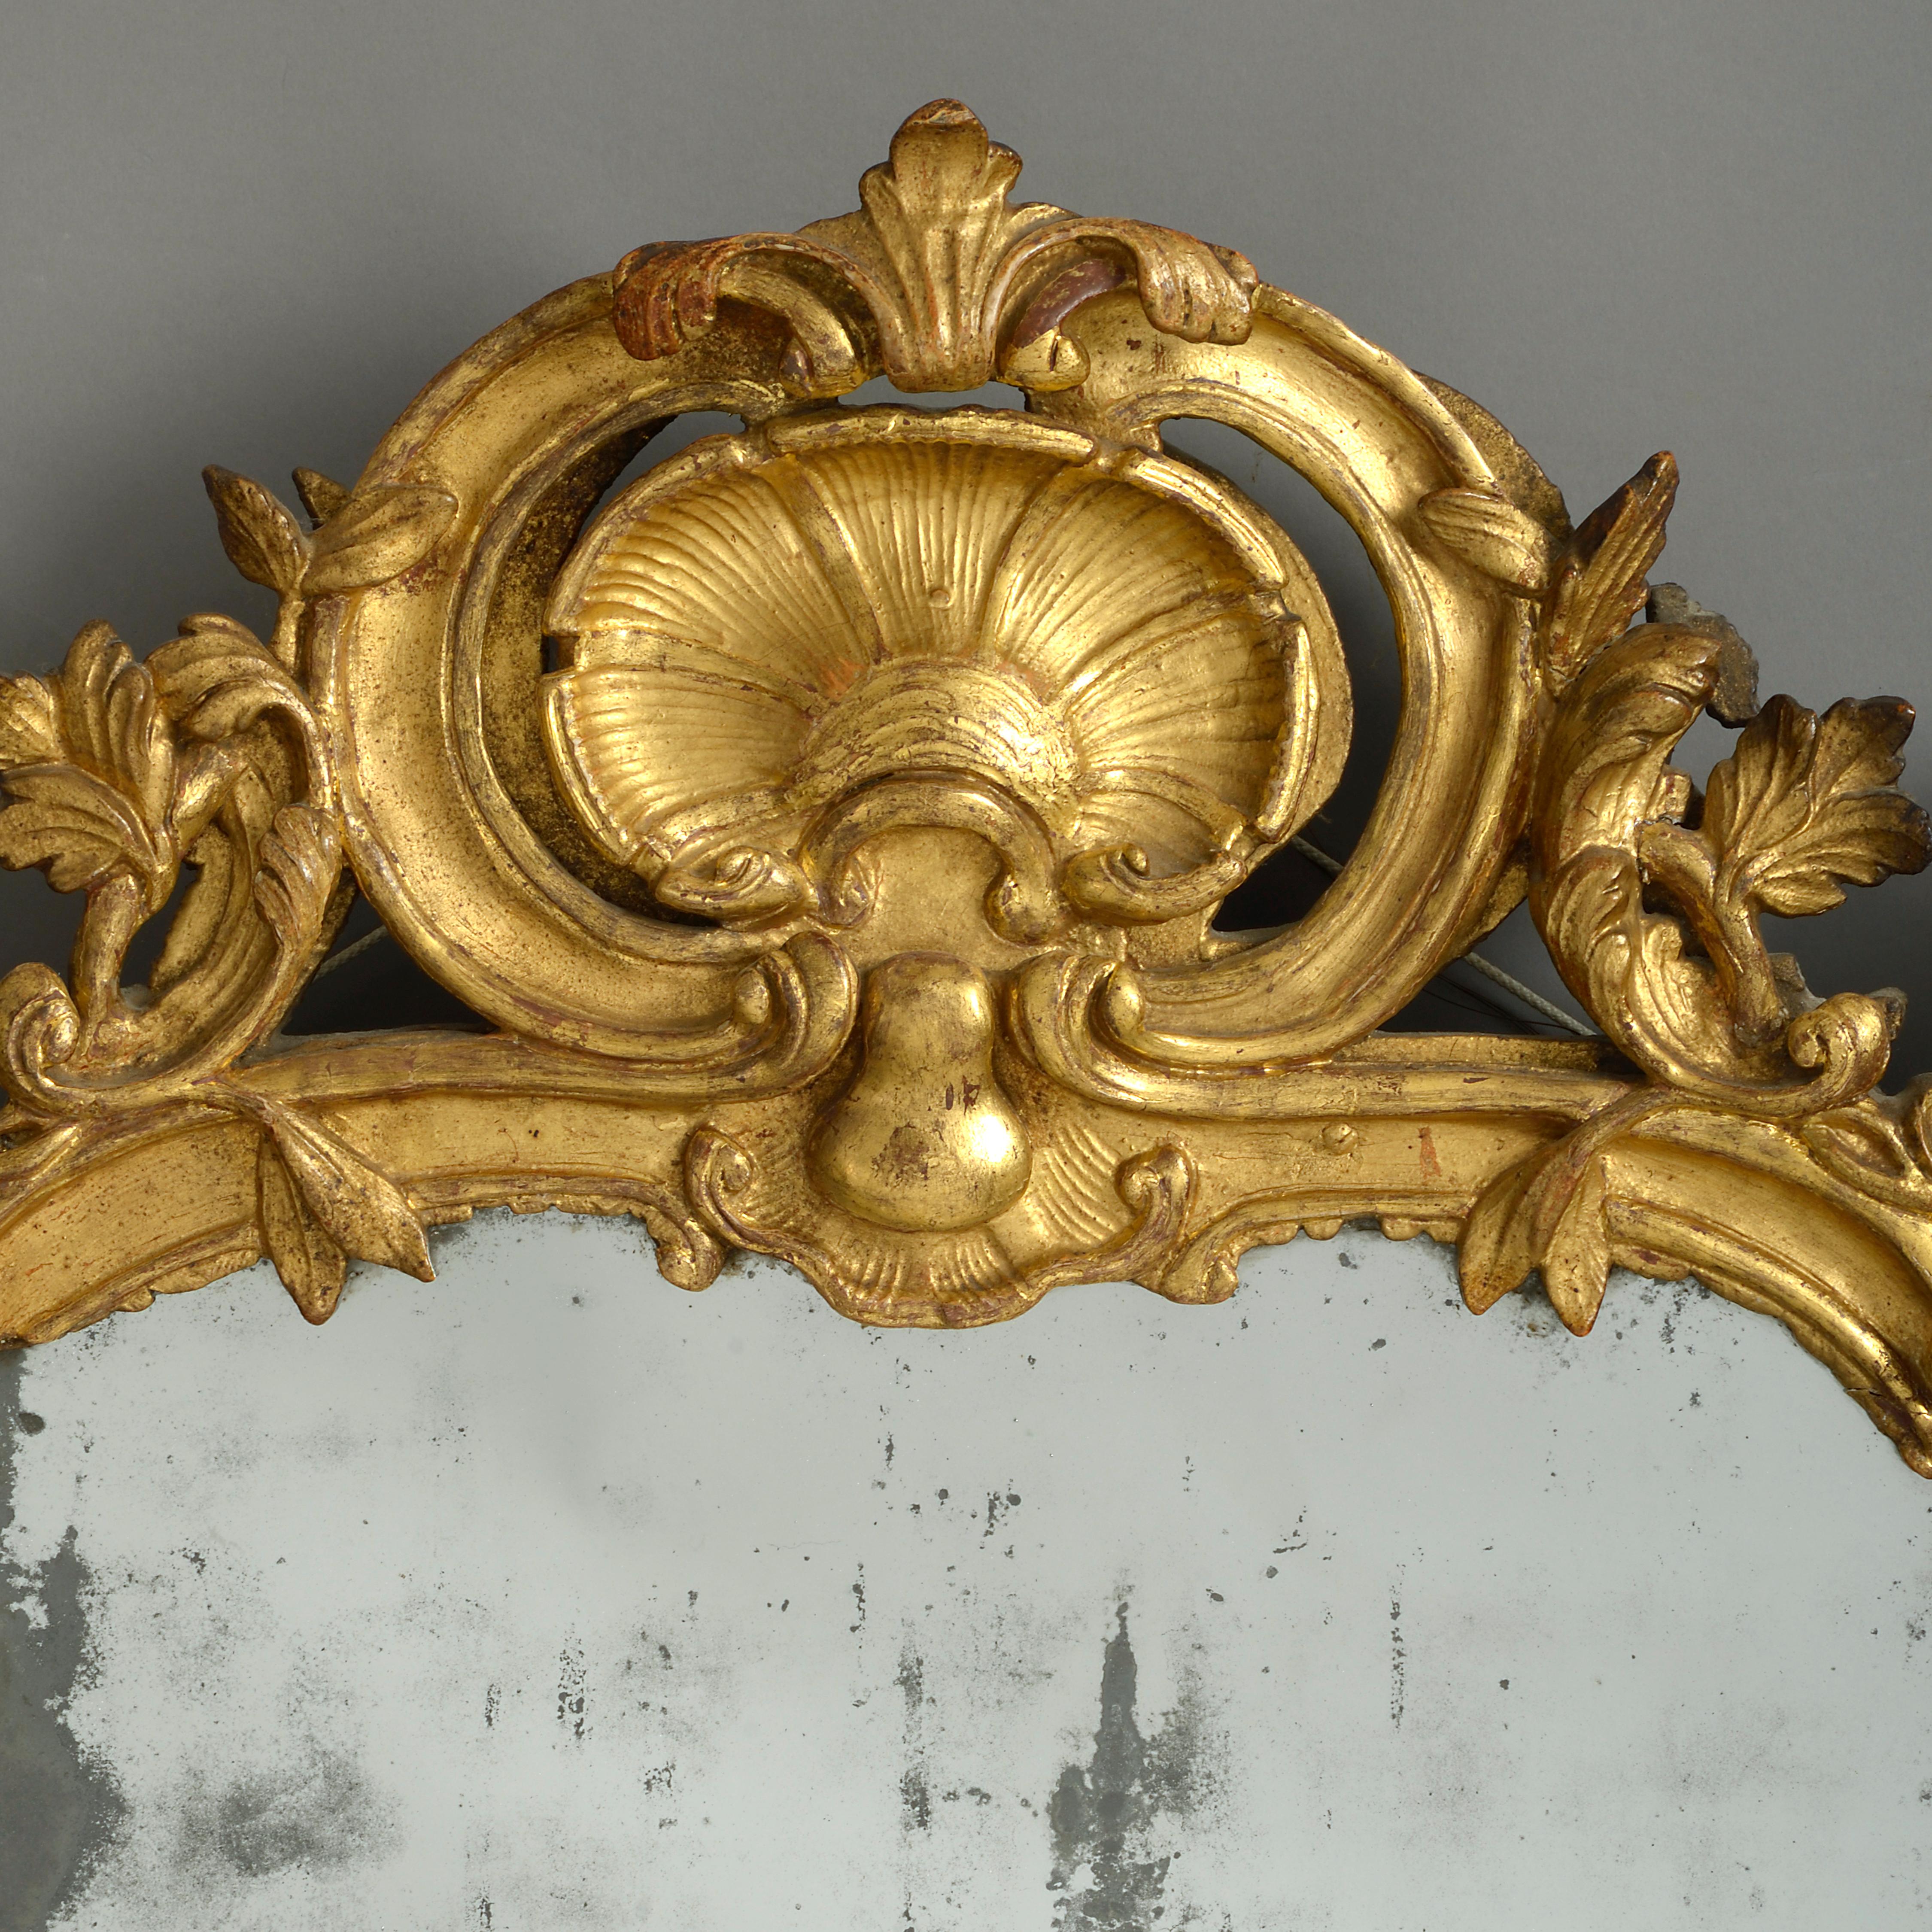 A fine mid-18th century Louis XV Period carved giltwood mirror in the Rococo manner and retaining the original mercury glass plate.